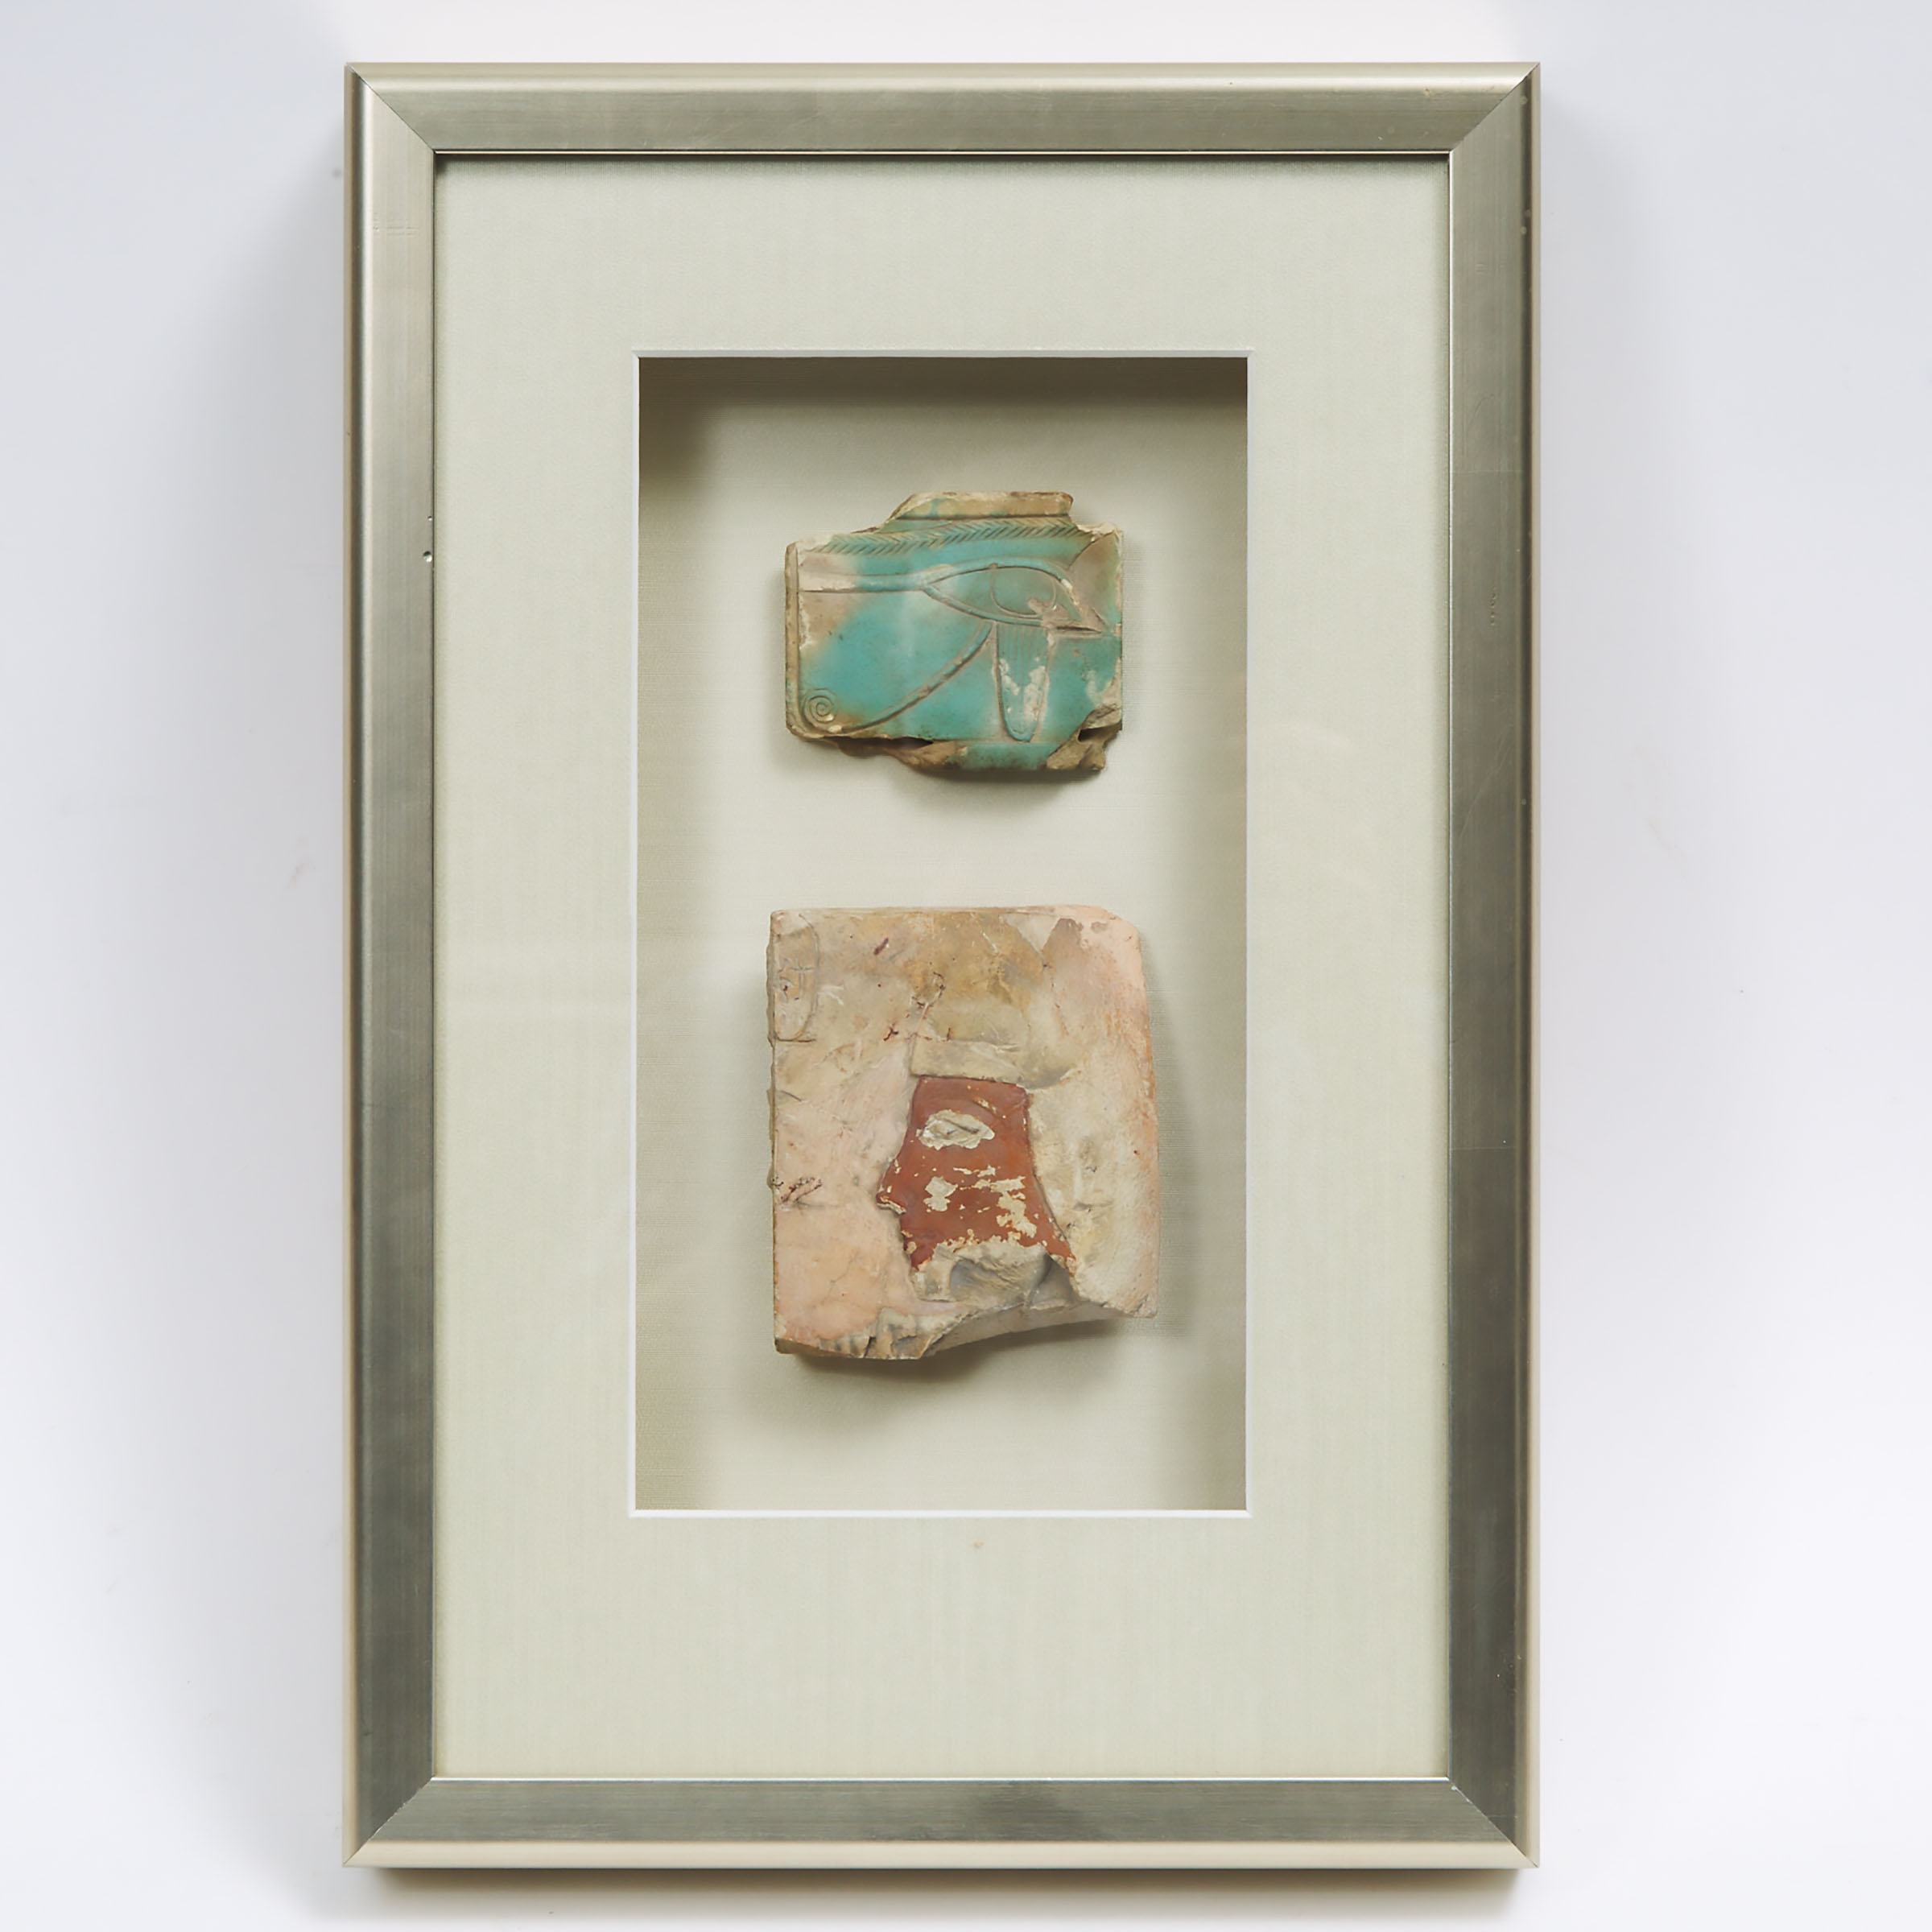 Egyptian Faience Eye of Horus Tile and a Painted Limestone Relief Wall Fragment, Middle Kingdom - Third Intermediate Period